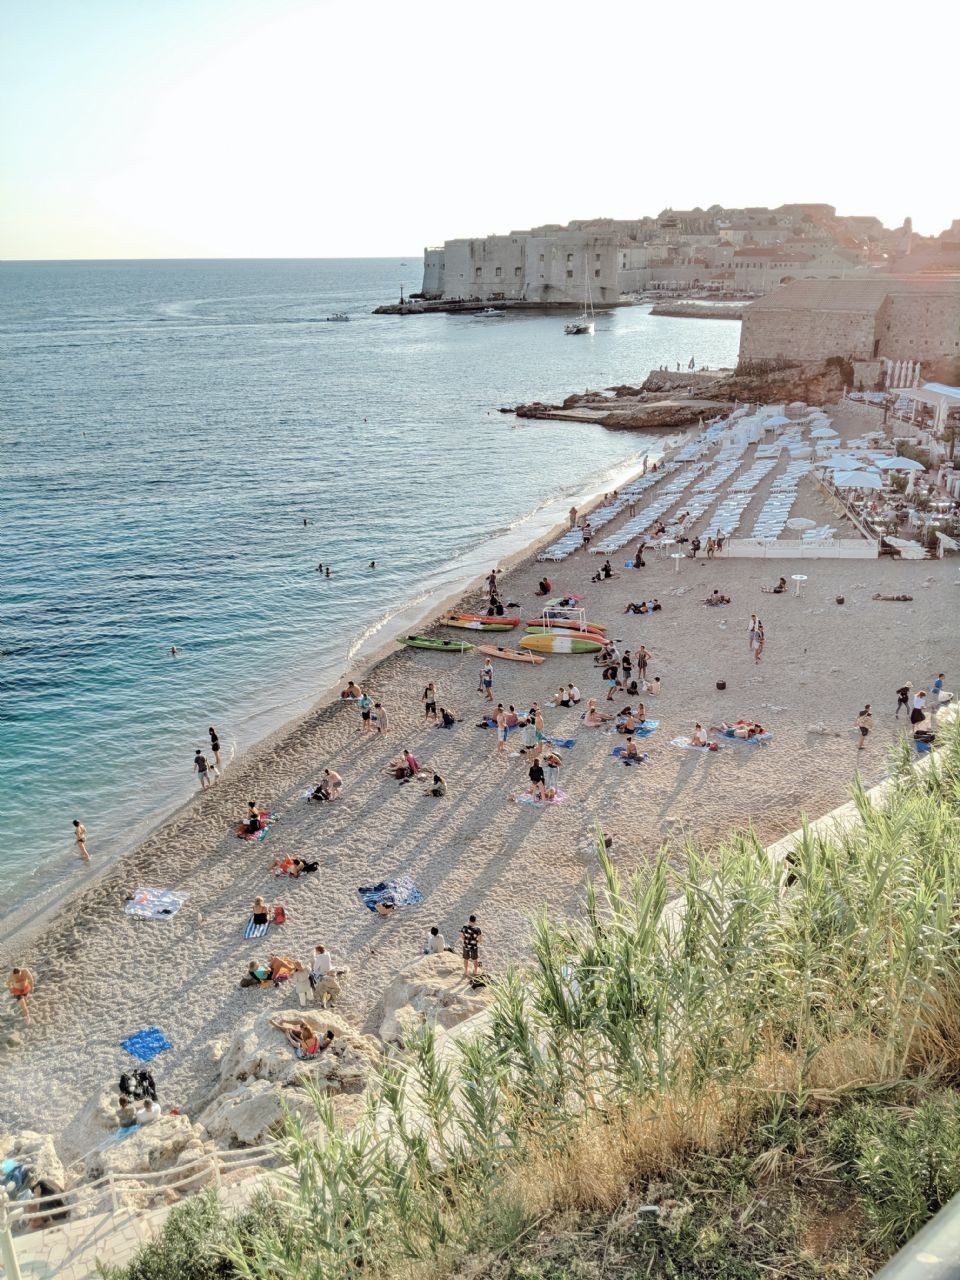 The beaches in Dubrovnik